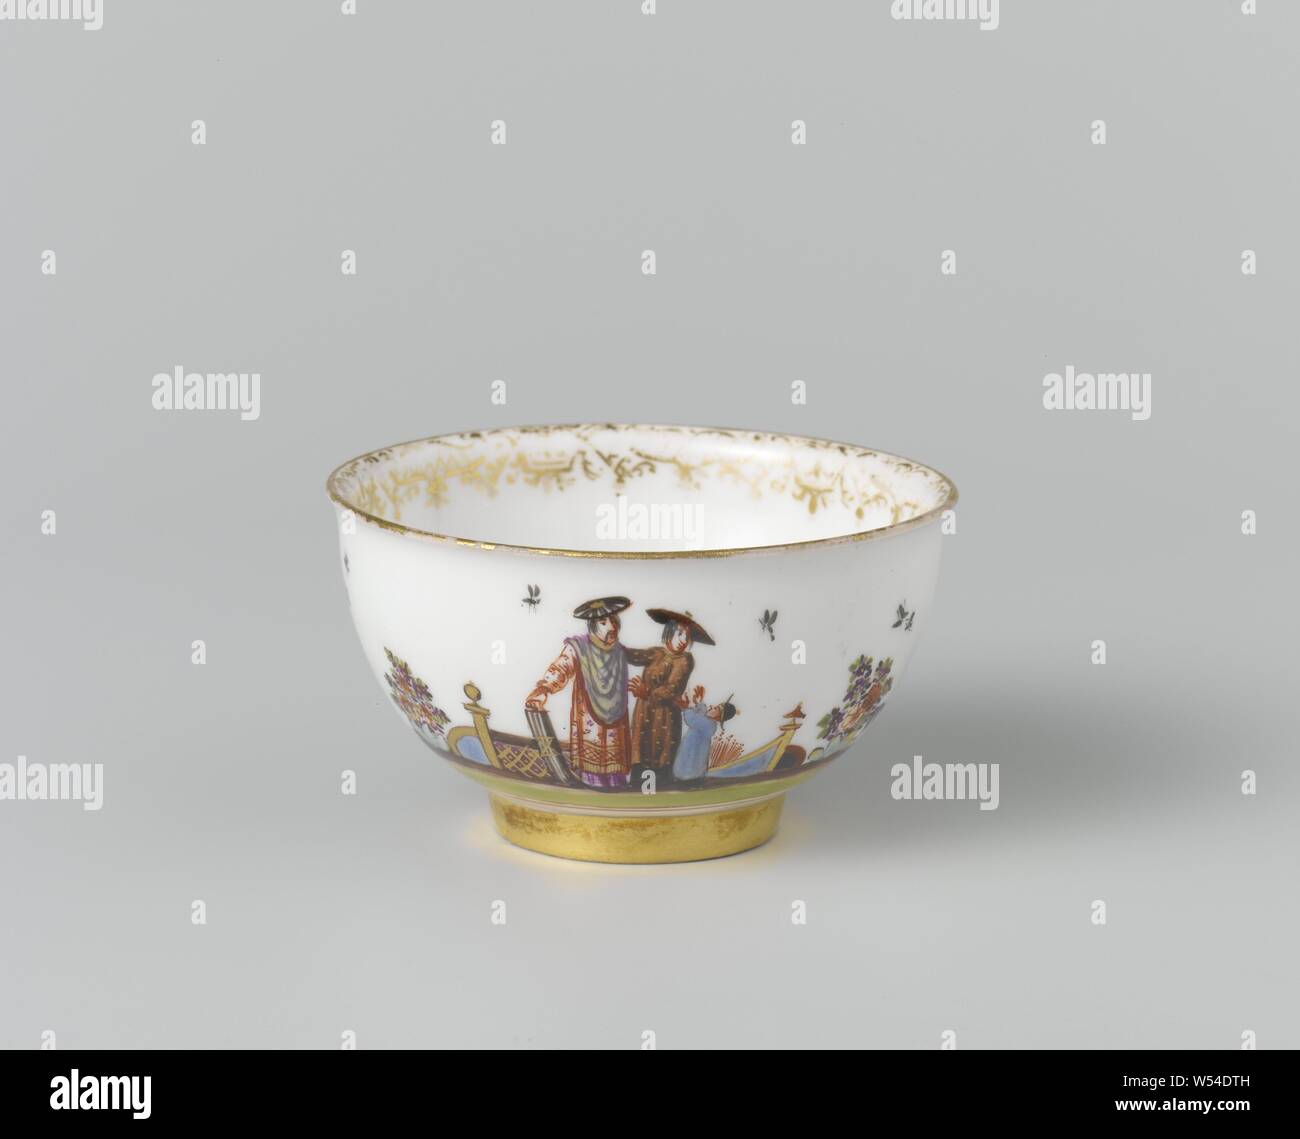 Cup and saucer Cup Head, multi-colored with chinoiseries, Painted porcelain head. The head is painted with a Höroldt chinoiserie. An ornament border in gold runs along the inside of the mouth rim. The head is marked., Meissener Porzellan Manufaktur, Meissen, c. 1730, porcelain (material), h 4.1 cm × d 7.3 cm Stock Photo